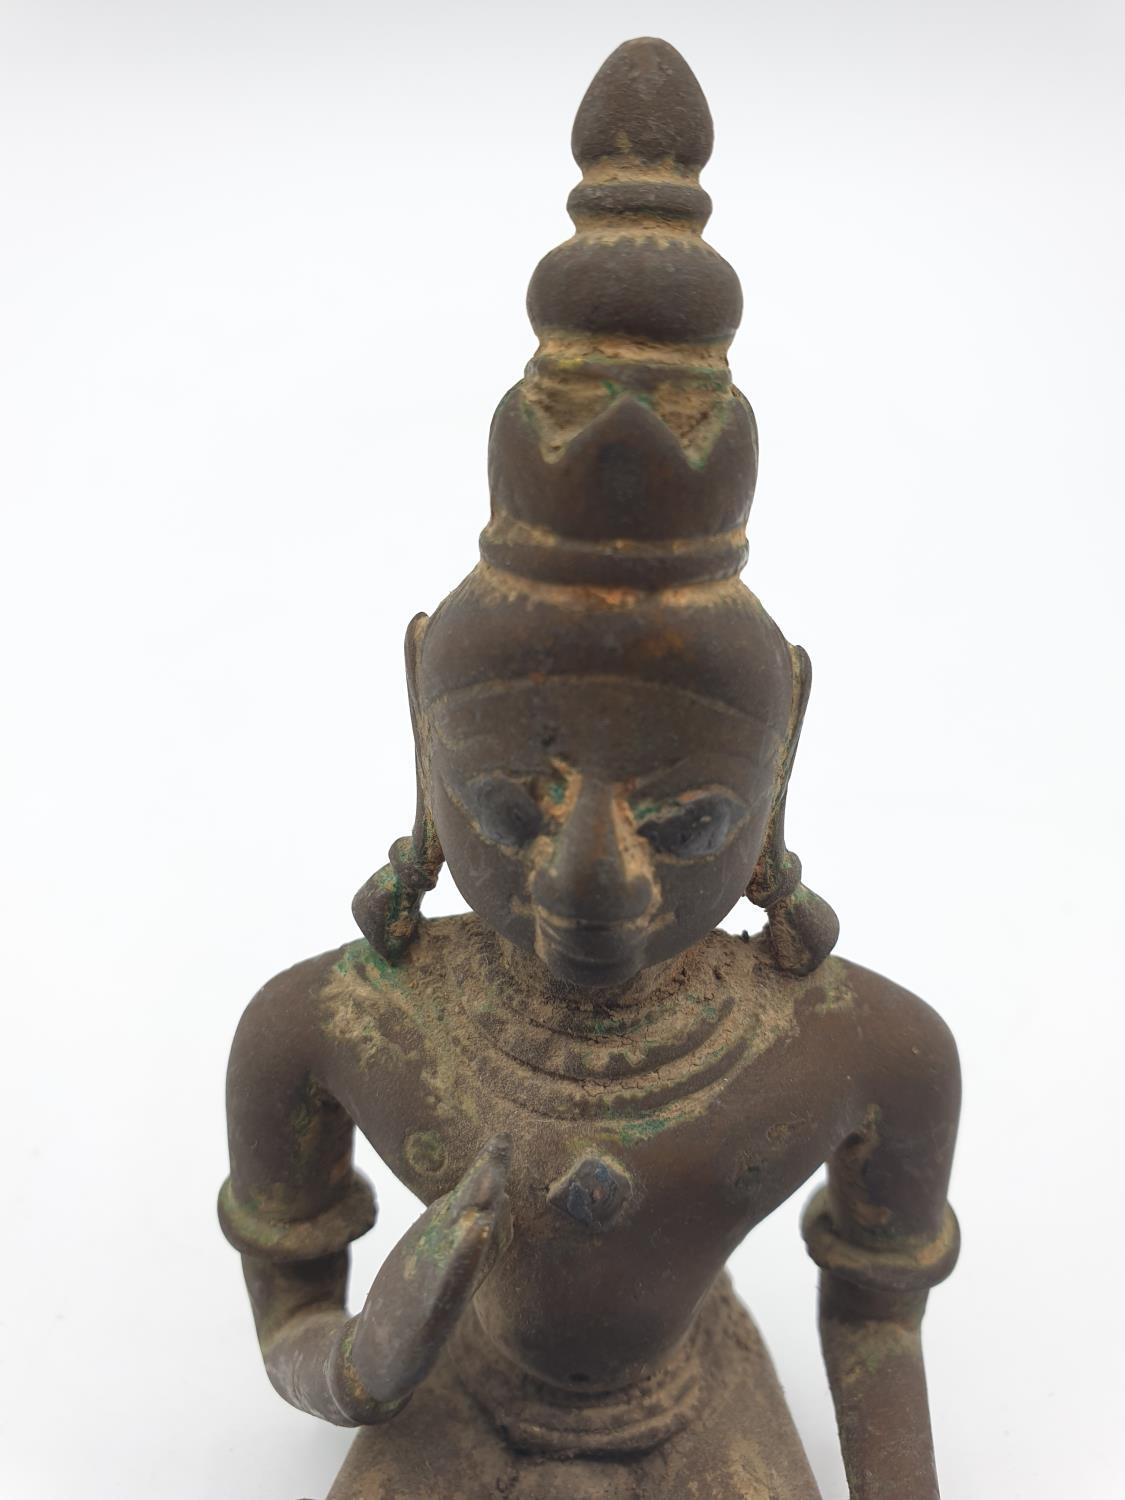 Late 18th century Oriental religious figure in bronze with gilt finish mostly worn off with age, 9cm - Image 9 of 9